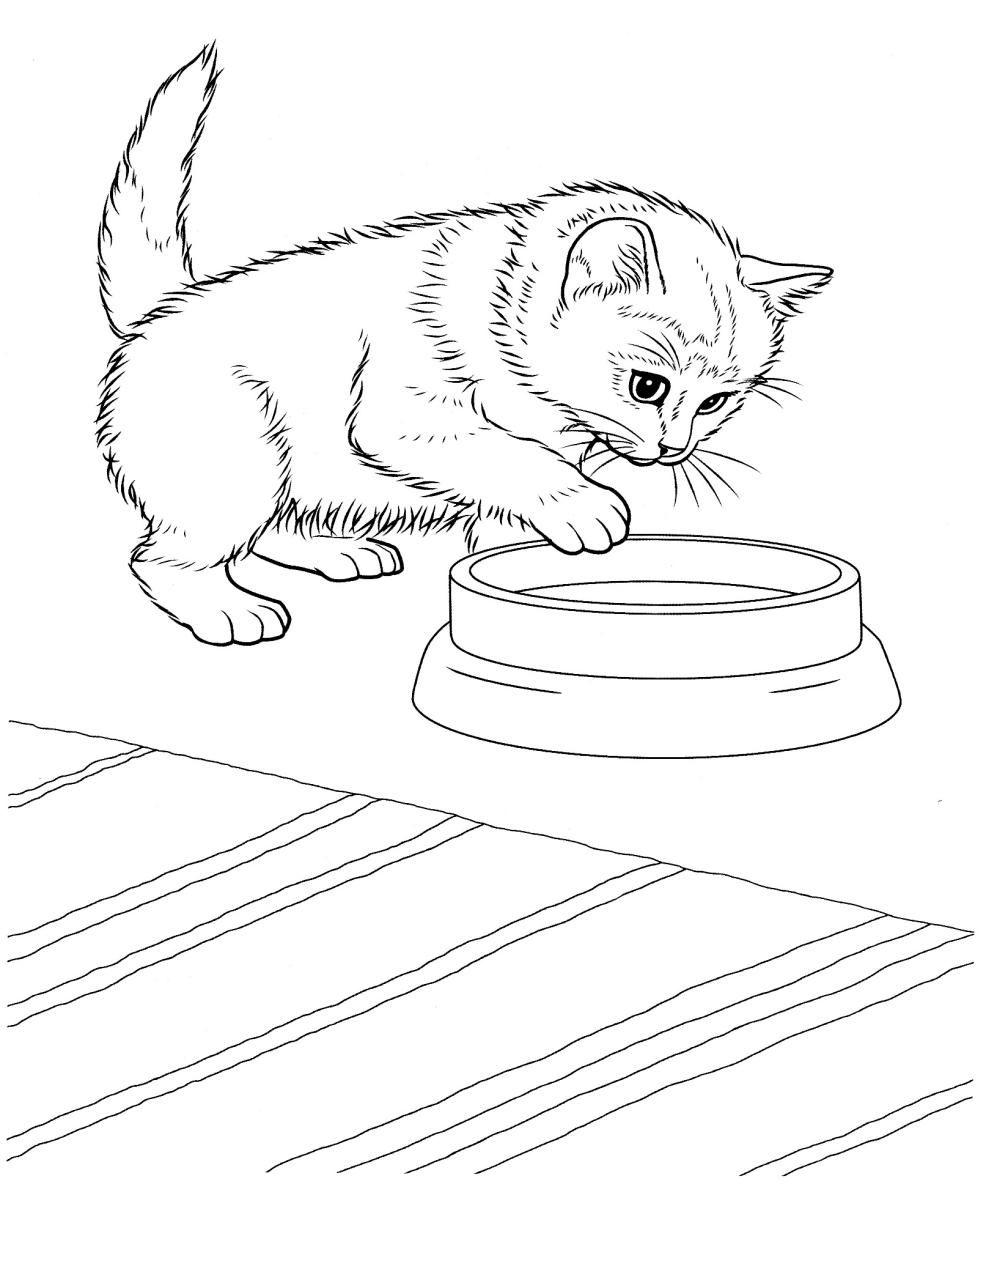 Free Printable Kitten Coloring Pages For Kids Best Coloring Pages For